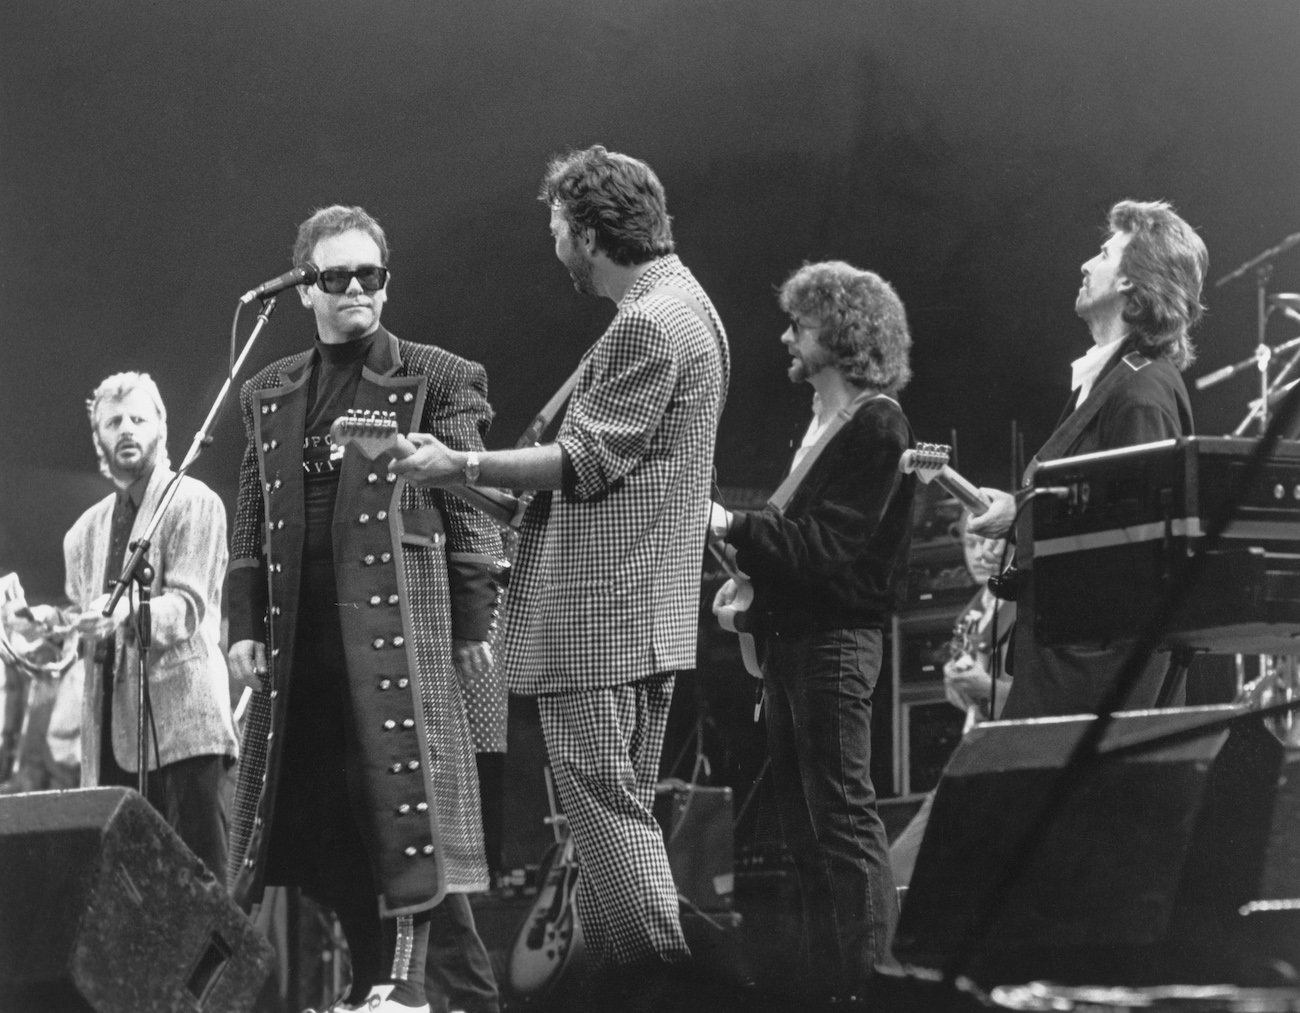 Ringo Starr, Elton John, Eric Clapton, Jeff Lynne, and George Harrison performing during the Prince's Trust concert in 1987.